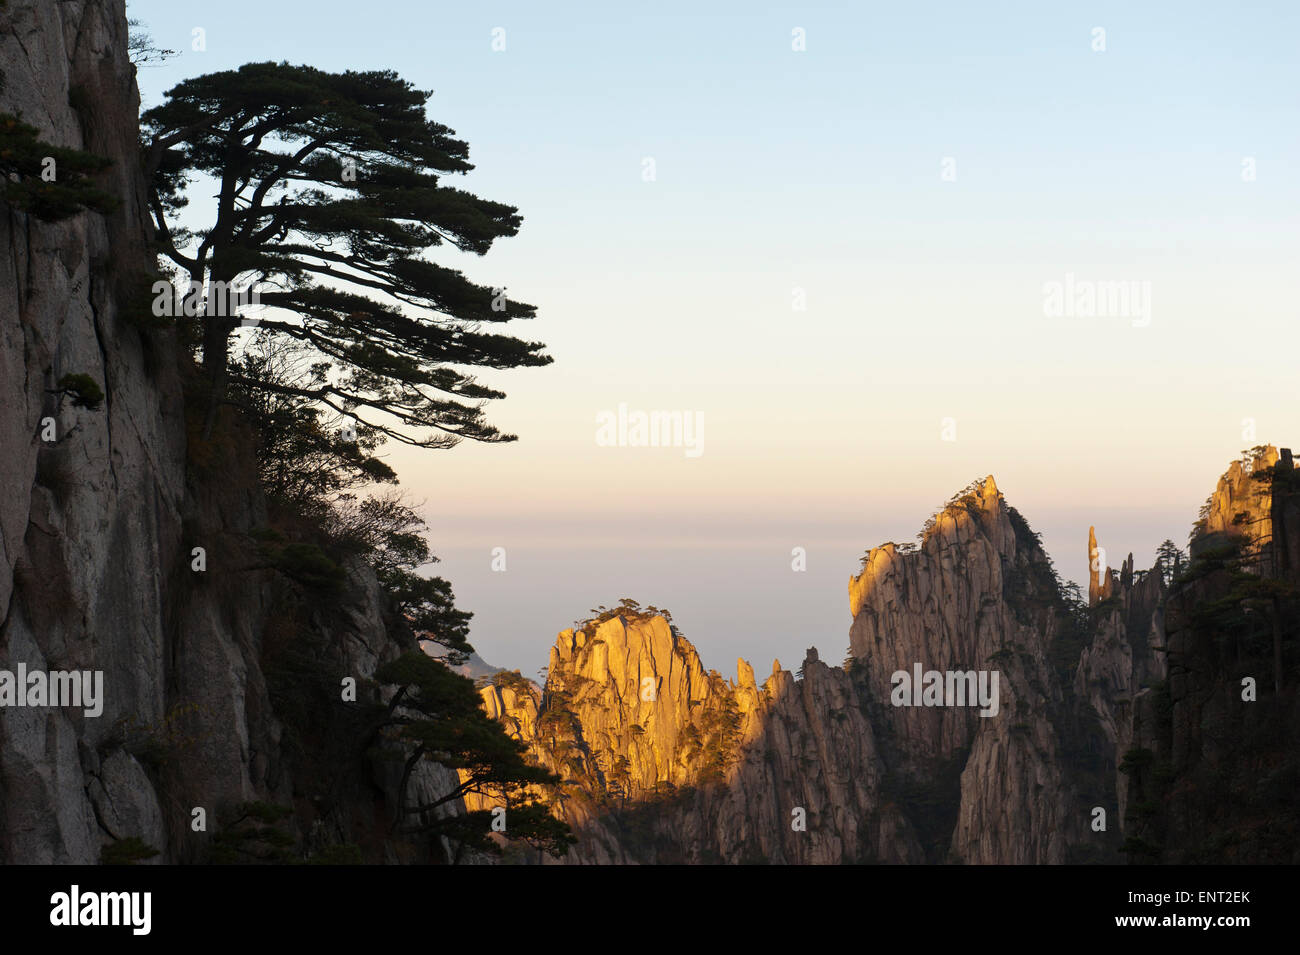 Bizarre towering rocks and mountains covered with scattered trees, Huangshan Pines (Pinus hwangshanensis), in the evening light Stock Photo